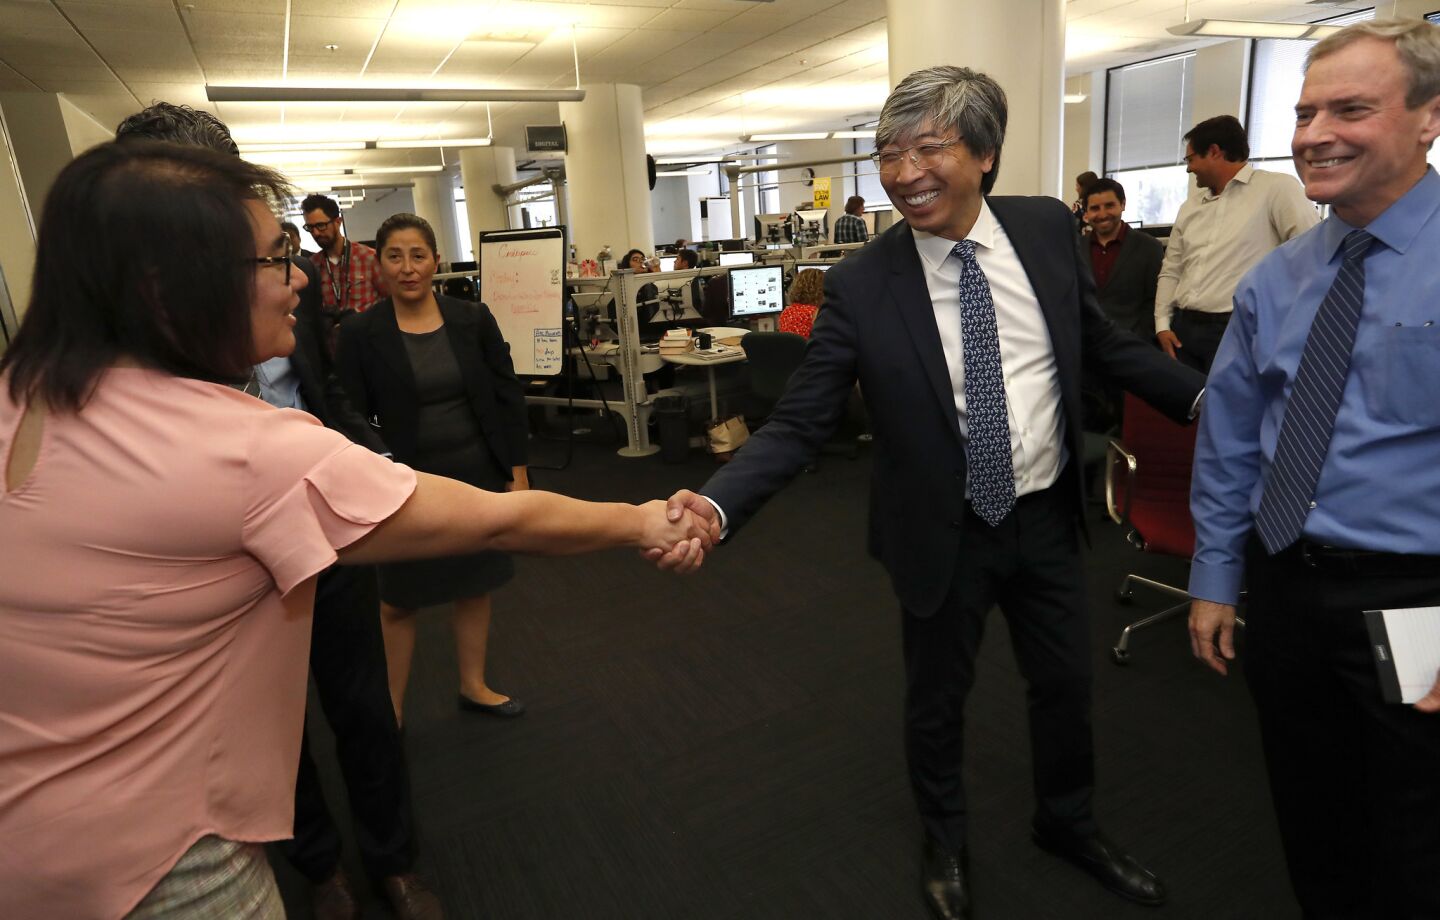 Dr. Patrick Soon-Shiong begins new era for L.A. Times